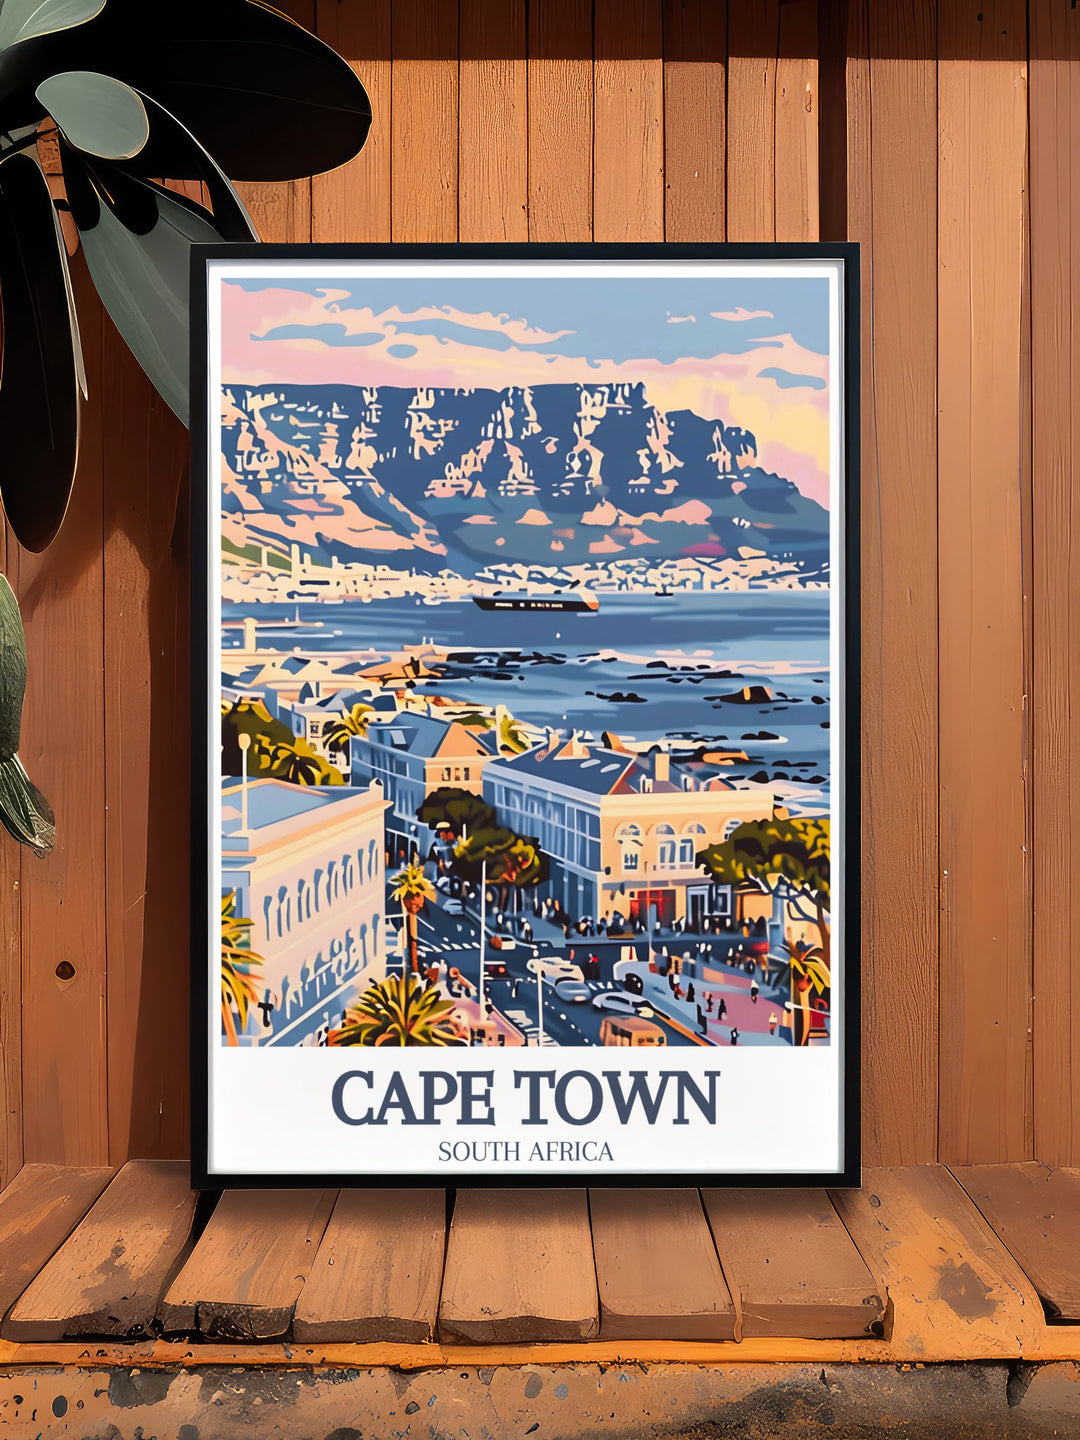 Gorgeous Cape Town art print of Table Mountain and the scenic Cape of Good Hope. This South Africa wall art is perfect for creating a visual impact in any room and is an excellent travel gift for those who love Cape Town.